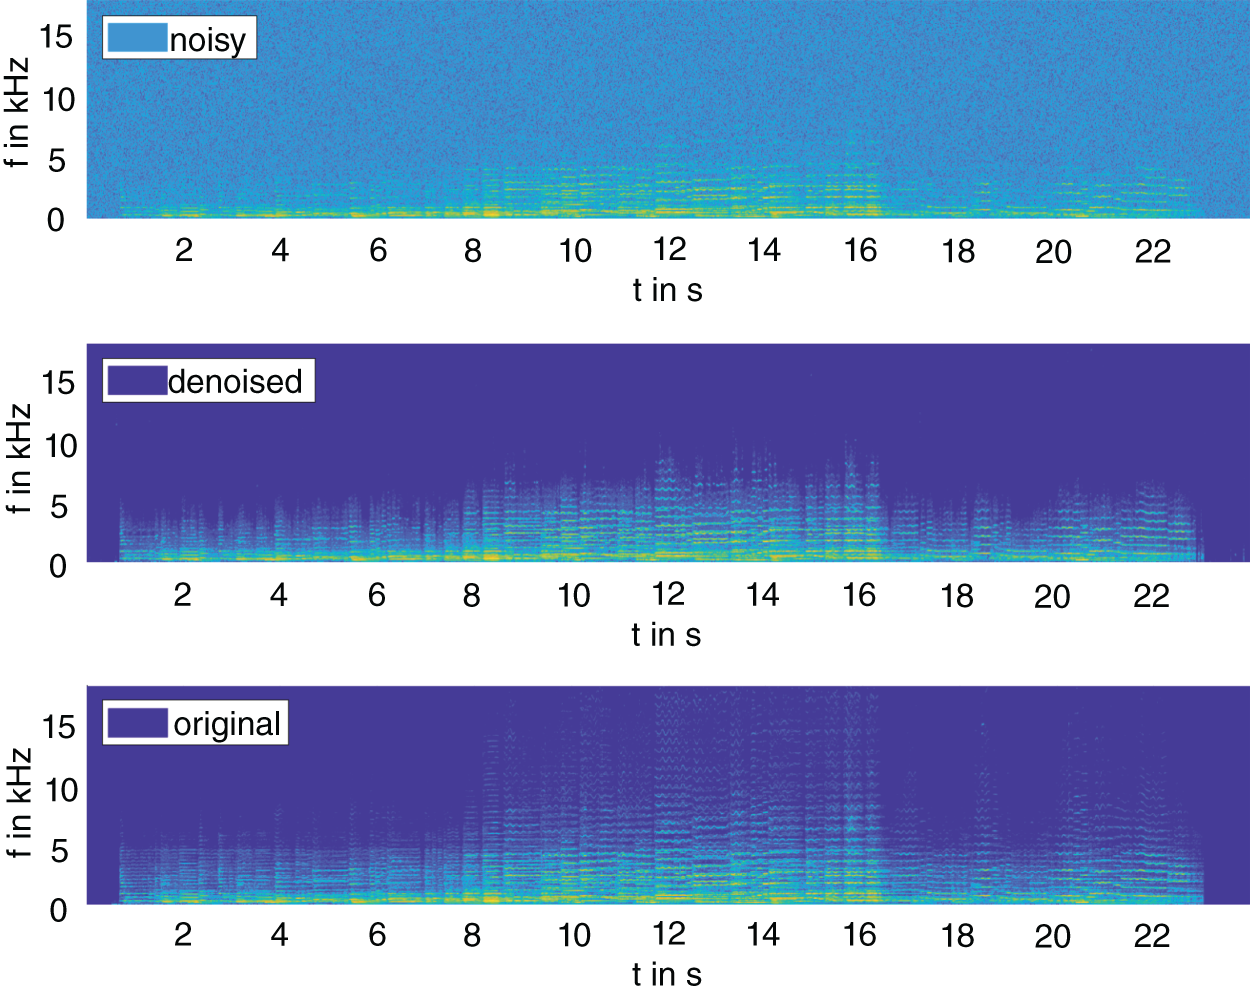 Schematic illustration of spectrogram of the example noisy, denoised, and original audio file from the Mirex-Su dataset.